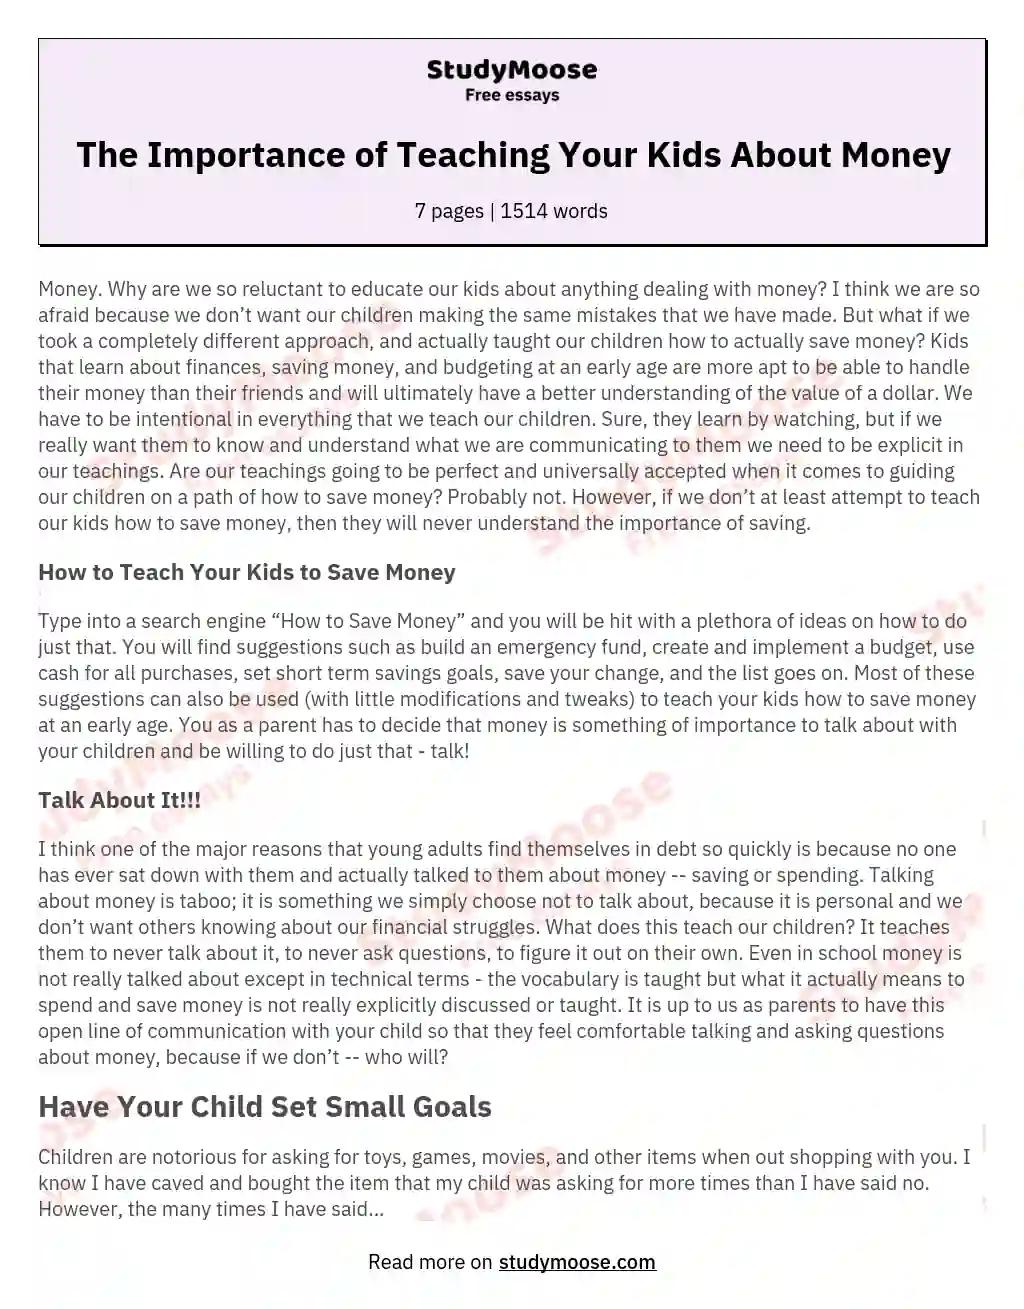 essay about budgeting money